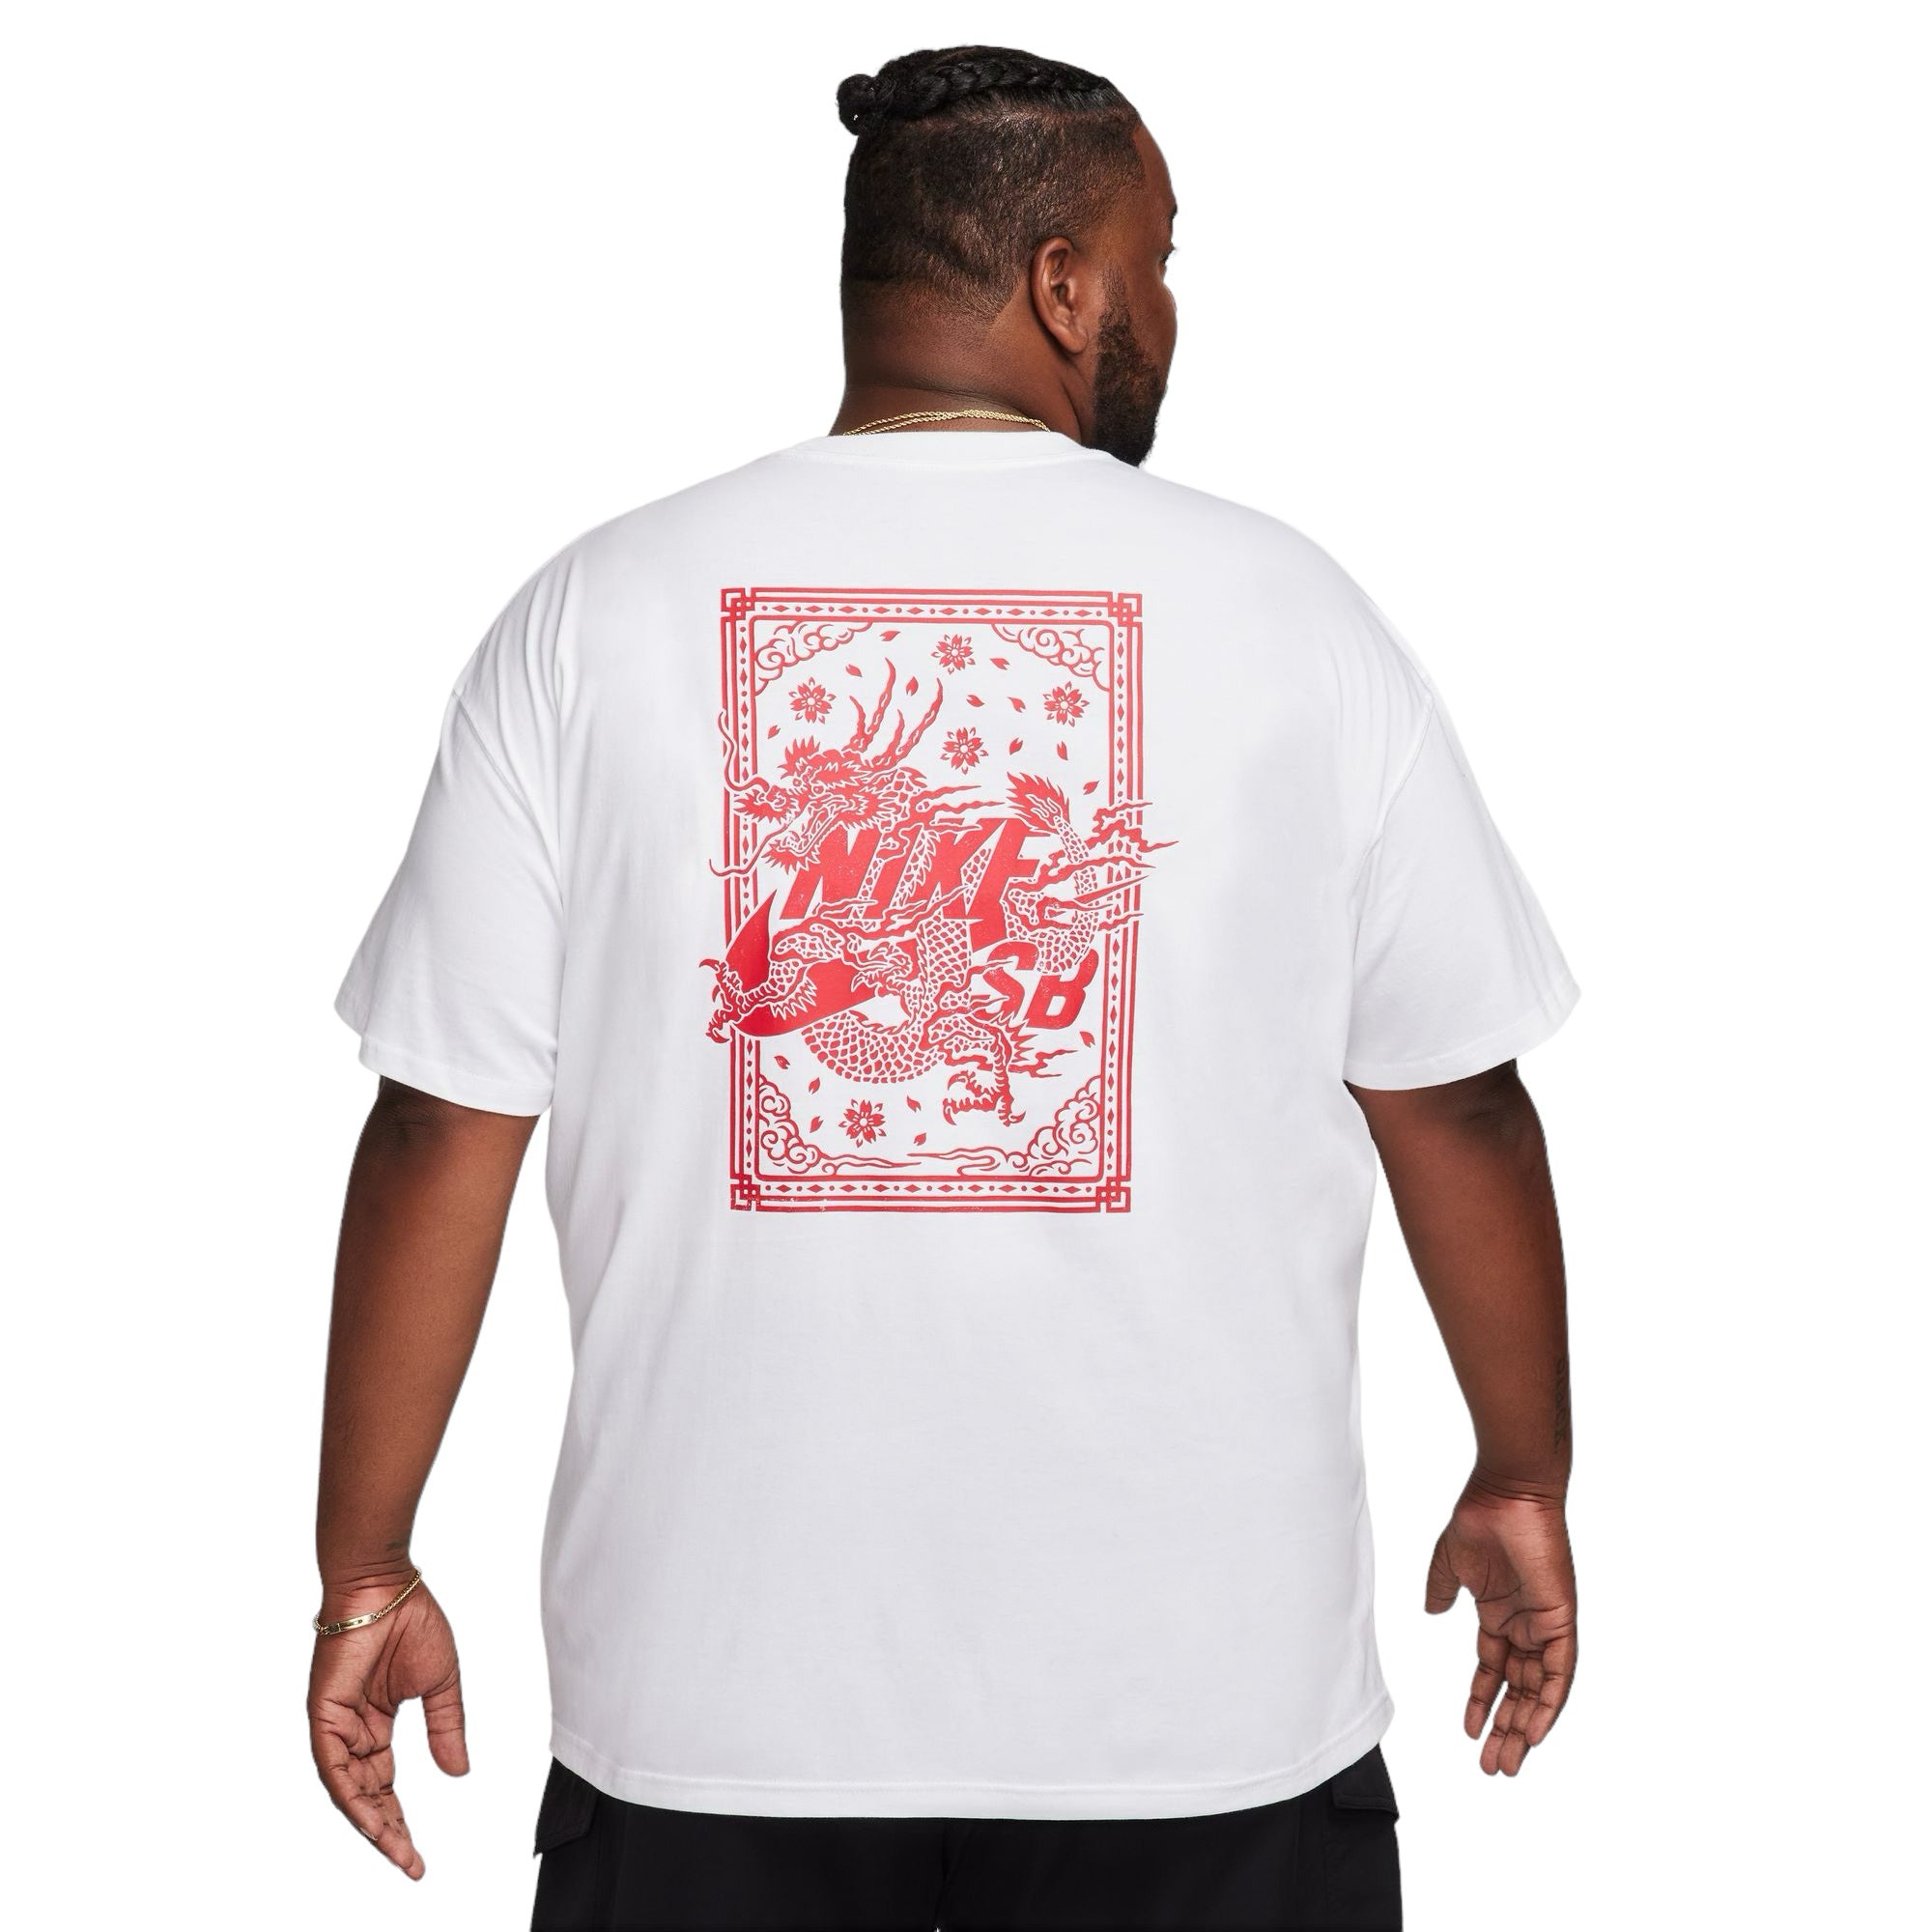 White nike short sleeve t-shirt with red swoosh logo on front and red dragon graphic on back. Free uk shipping for orders over £50